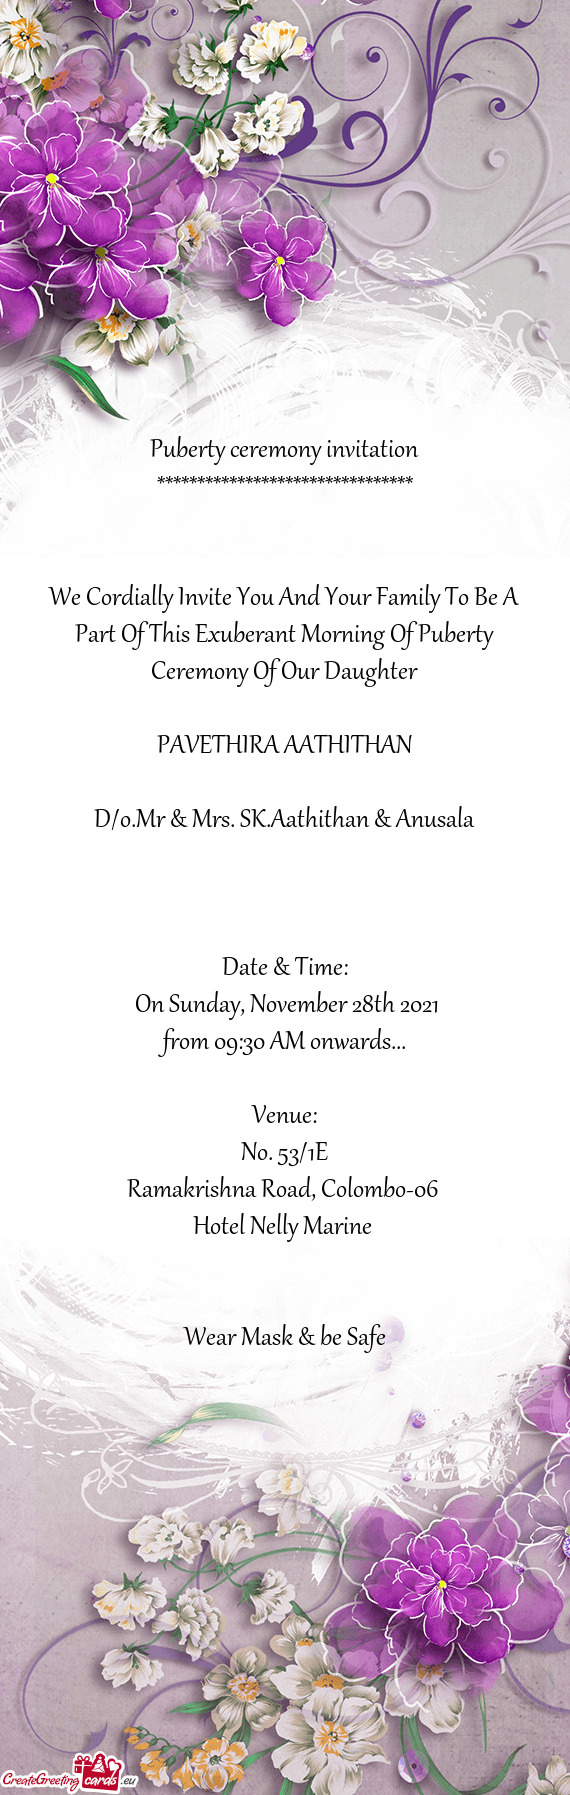 We Cordially Invite You And Your Family To Be A Part Of This Exuberant Morning Of Puberty Ceremony O